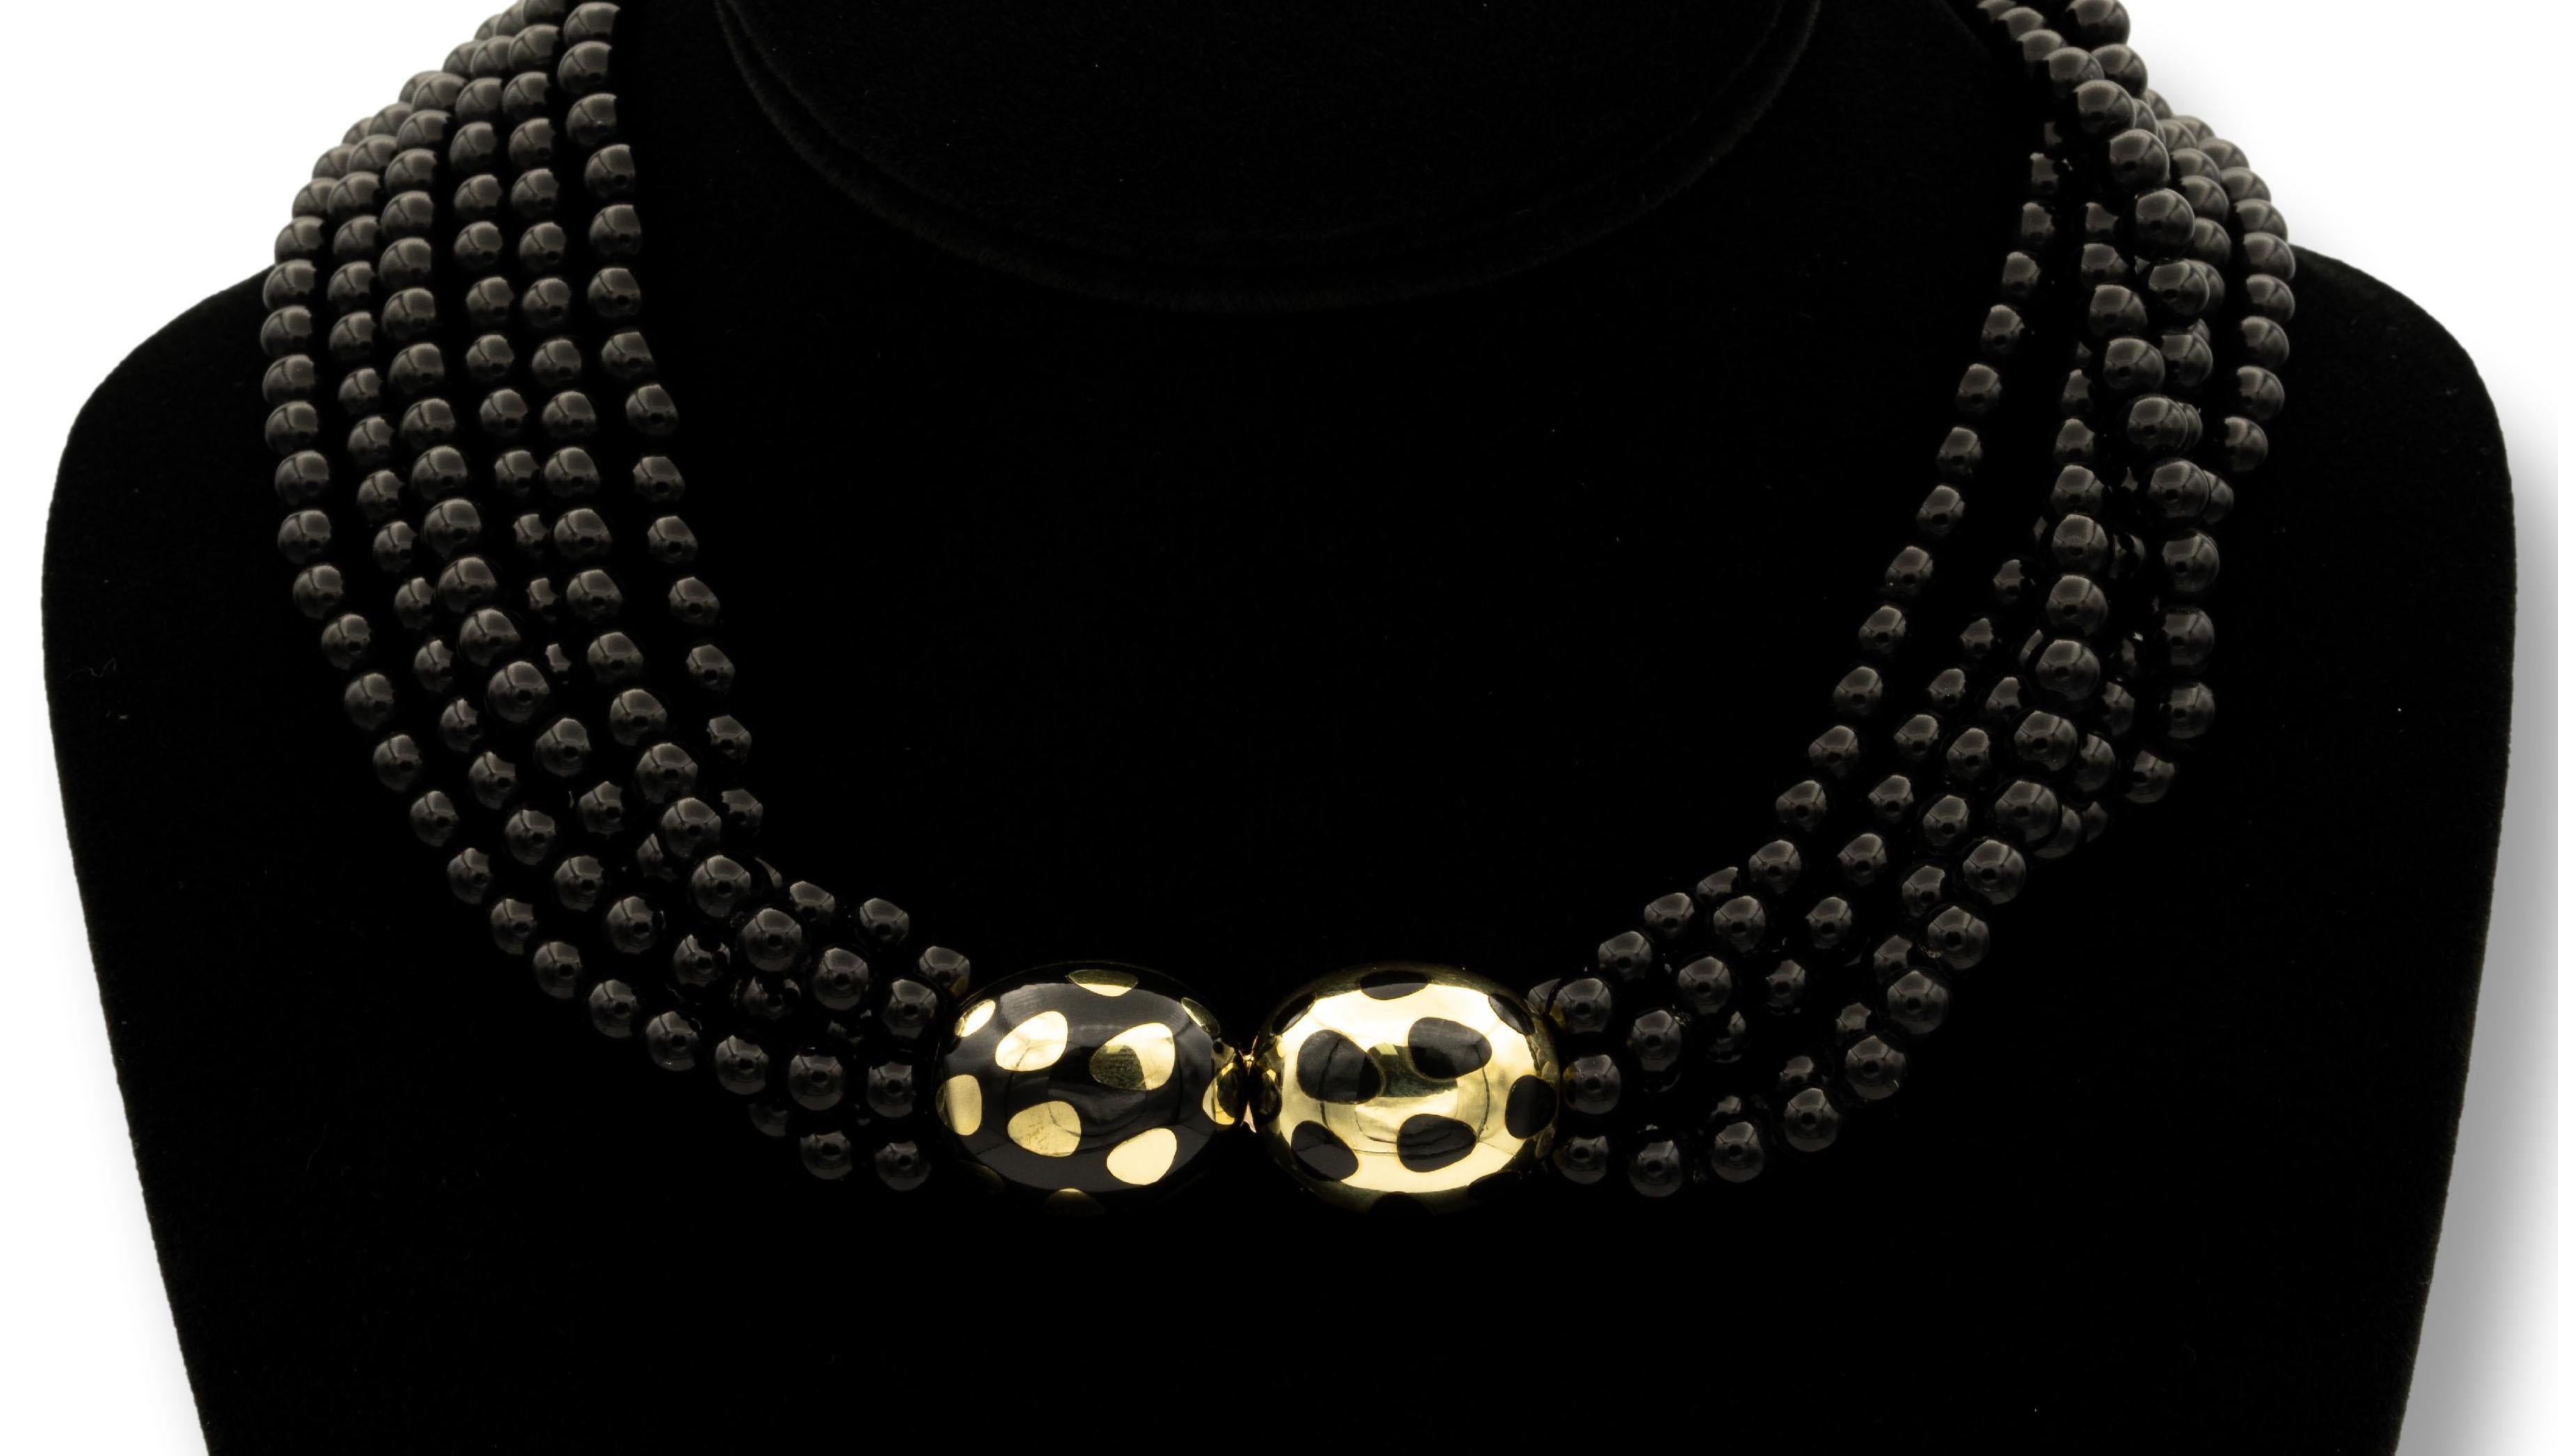 Tiffany & Co. Torsade necklace by Angela Cummings finely crafted in 18 karat yellow gold with multiple strands of 5.5-5.7mm black jade beads. The beads are held by positive/negative design with a push-down tongue clasp, embellished with multiple